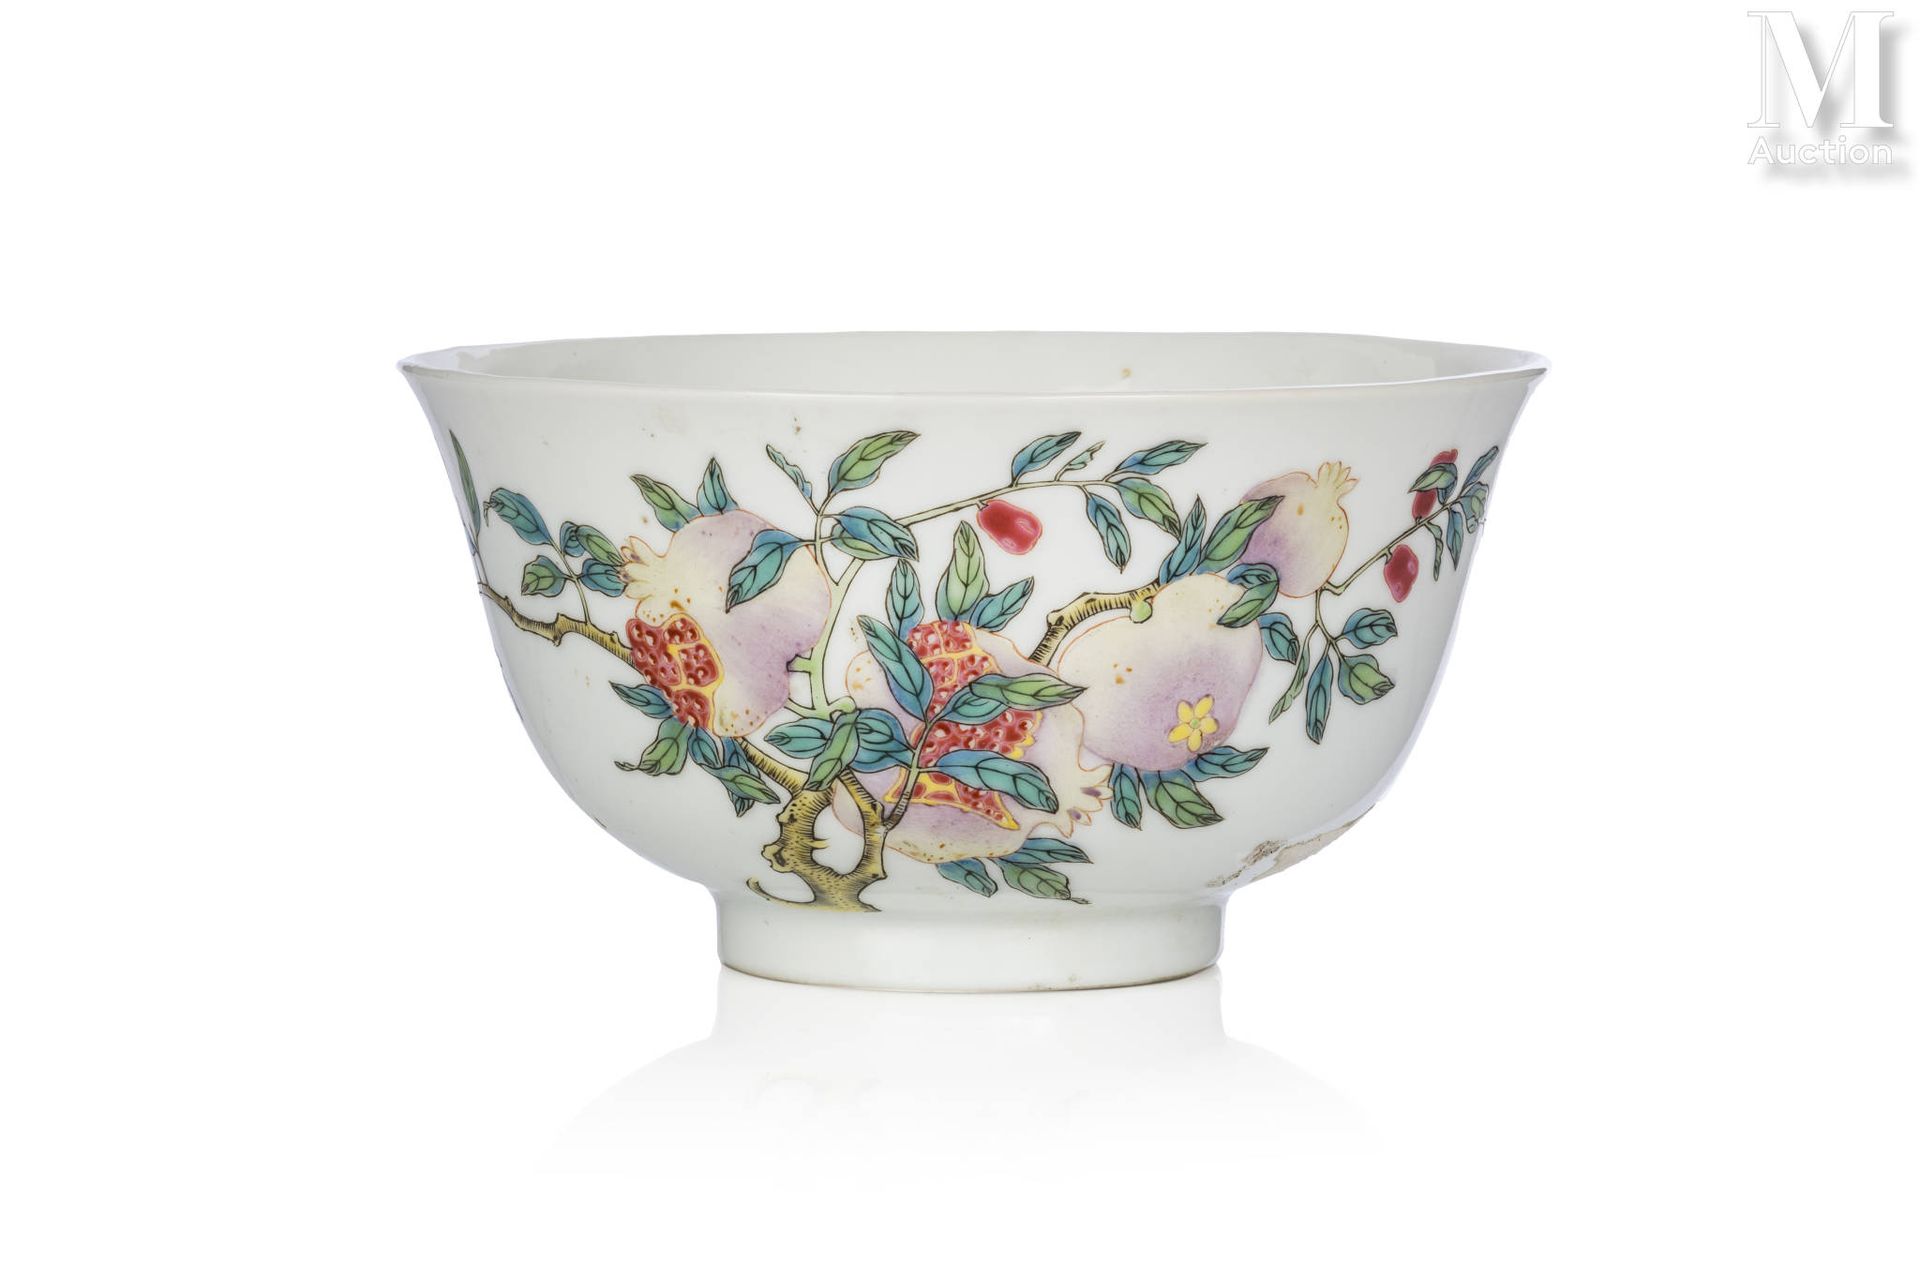 CHINE, XVIIIe siècle Porcelain bowl

mounted on a small foot, with a campanulate&hellip;